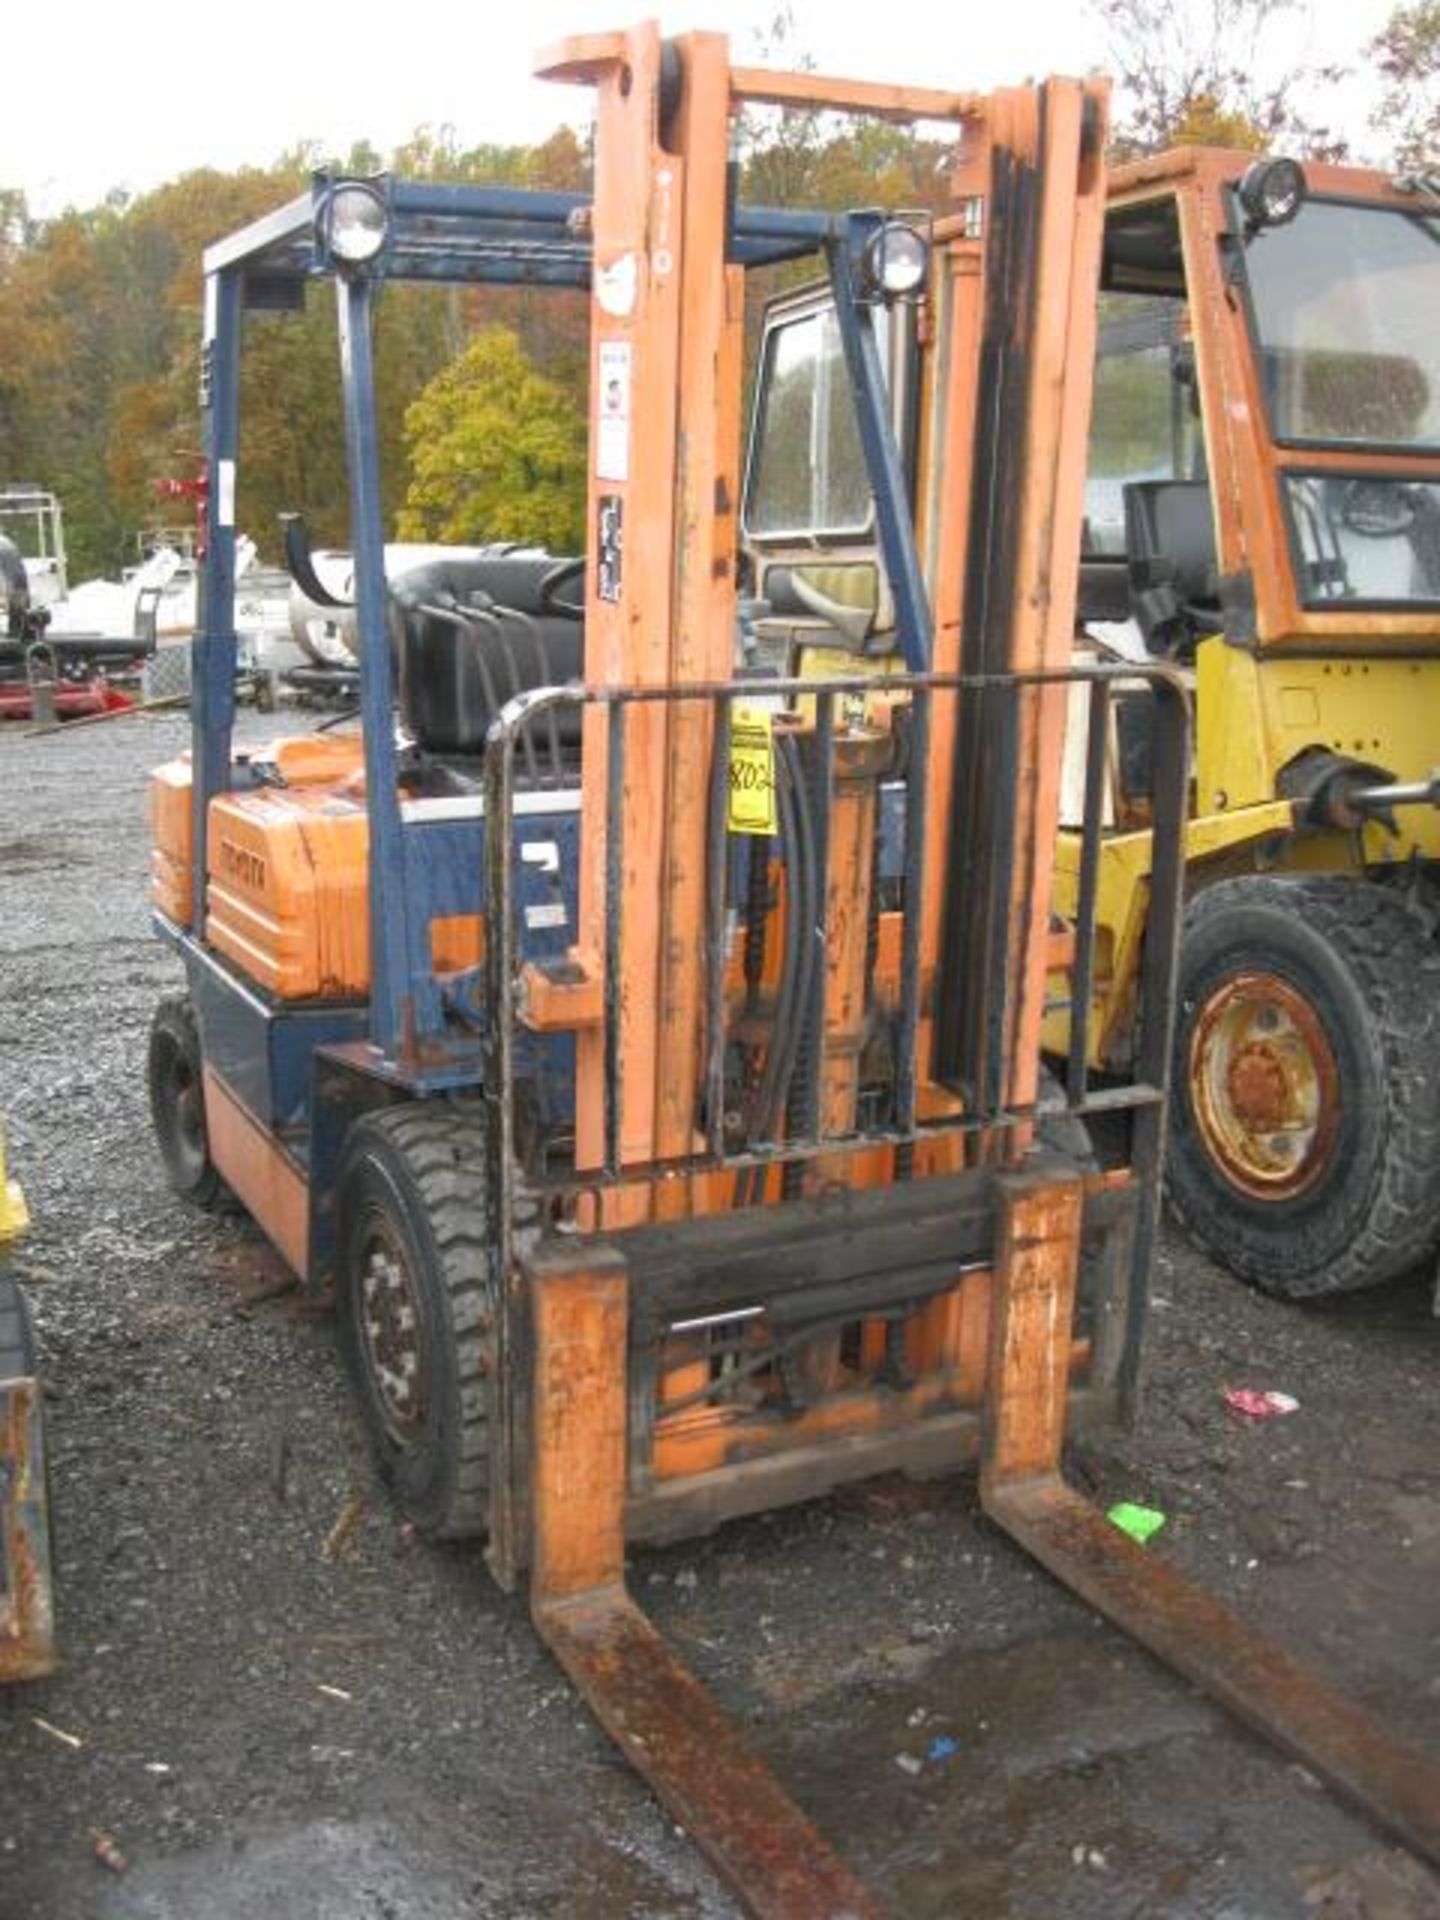 TOYOTA 42-5FG25 5,000 LB. PROPANE FORKLIFT 2-STAGE CUSHION TIRES 130'' LIFT HEIGHT SOLID TIRES